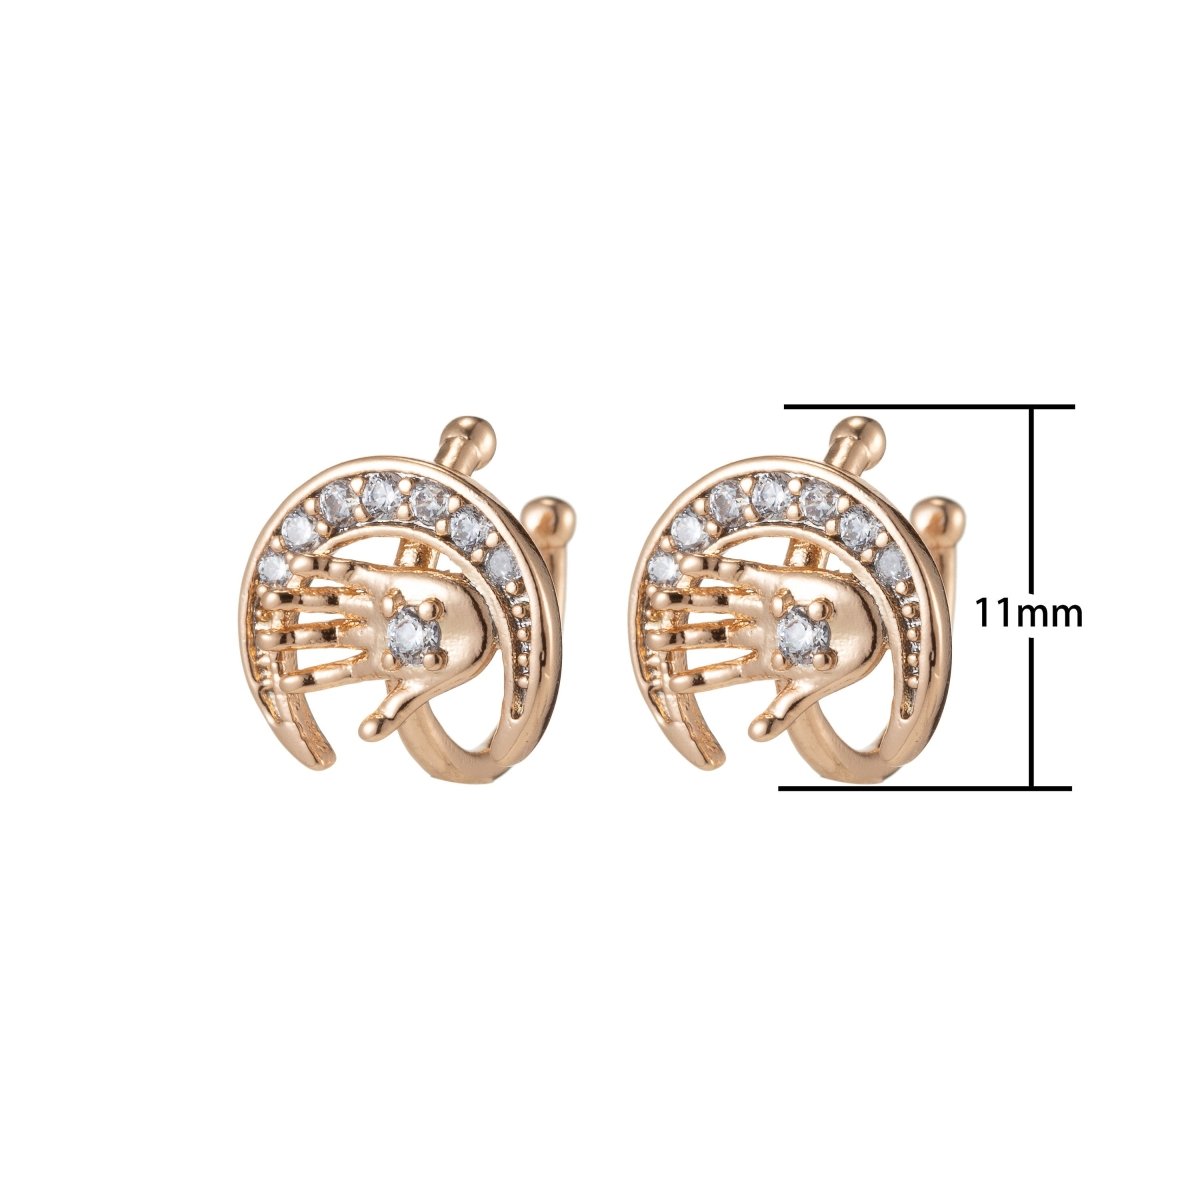 1x Hand Ear Cuffs for Non Pierced Ears Micro Pave Crystal Gold Clip on Conch Cuff Earrings for Women Girls AI-046 - DLUXCA